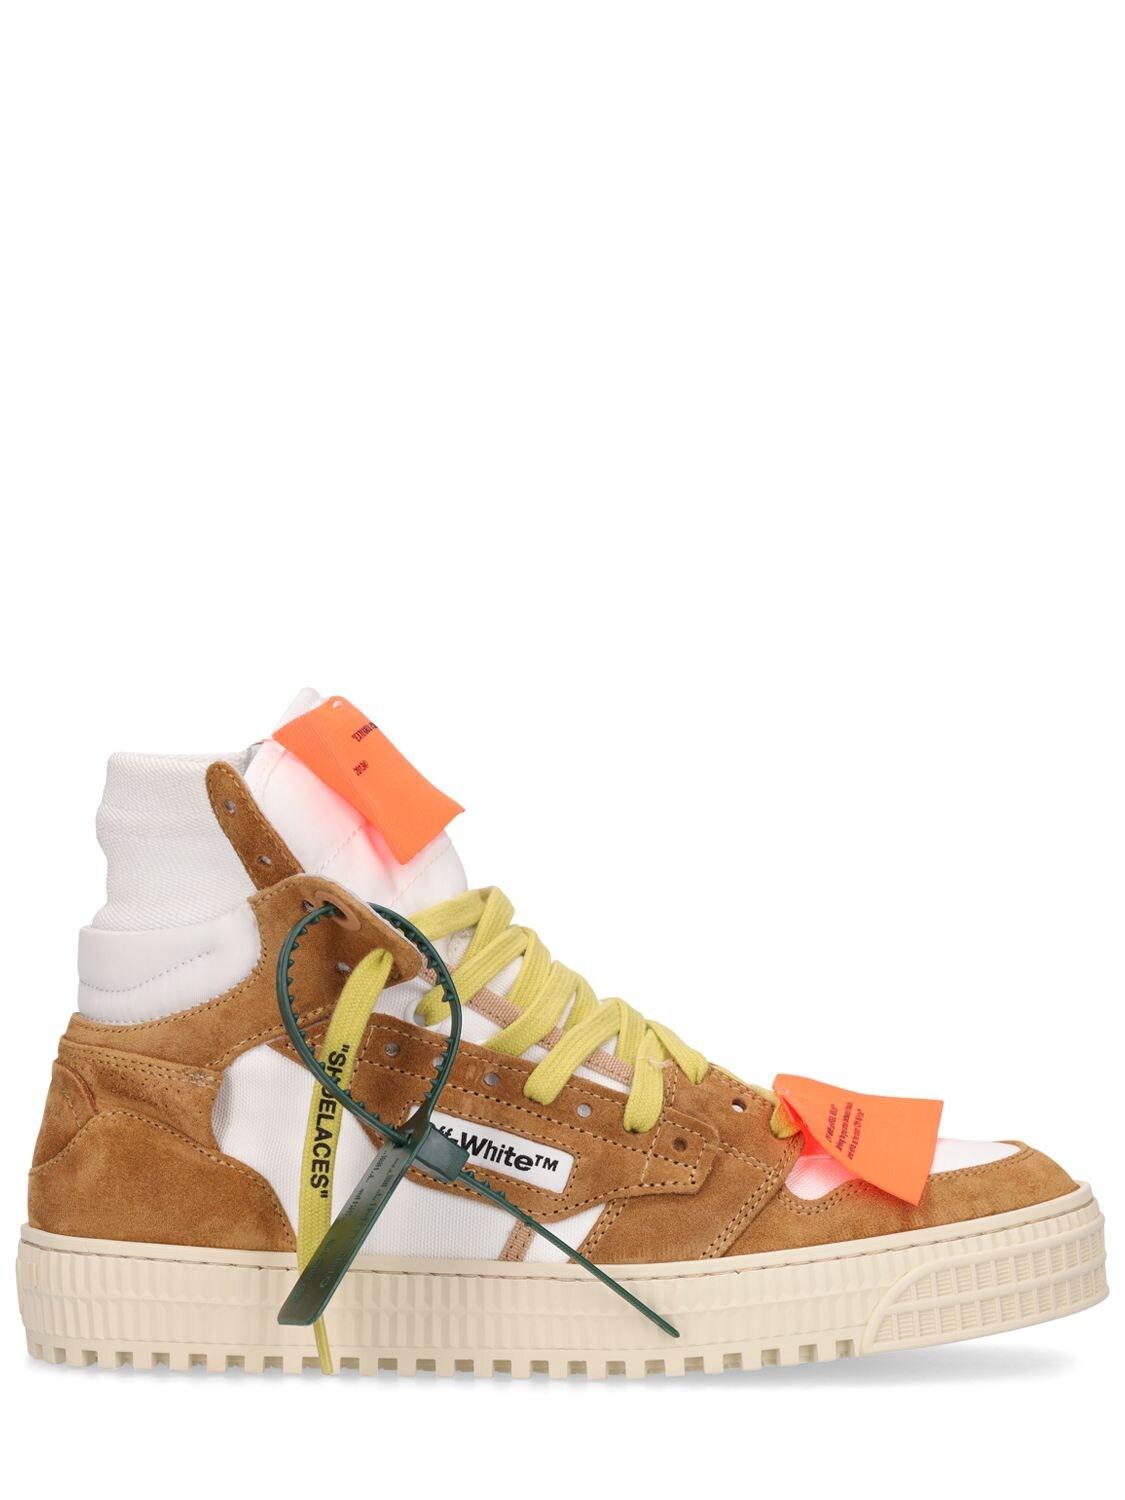 Off-White c/o Virgil Abloh 20mm 3.0 Off Court Suede Sneakers in Orange |  Lyst